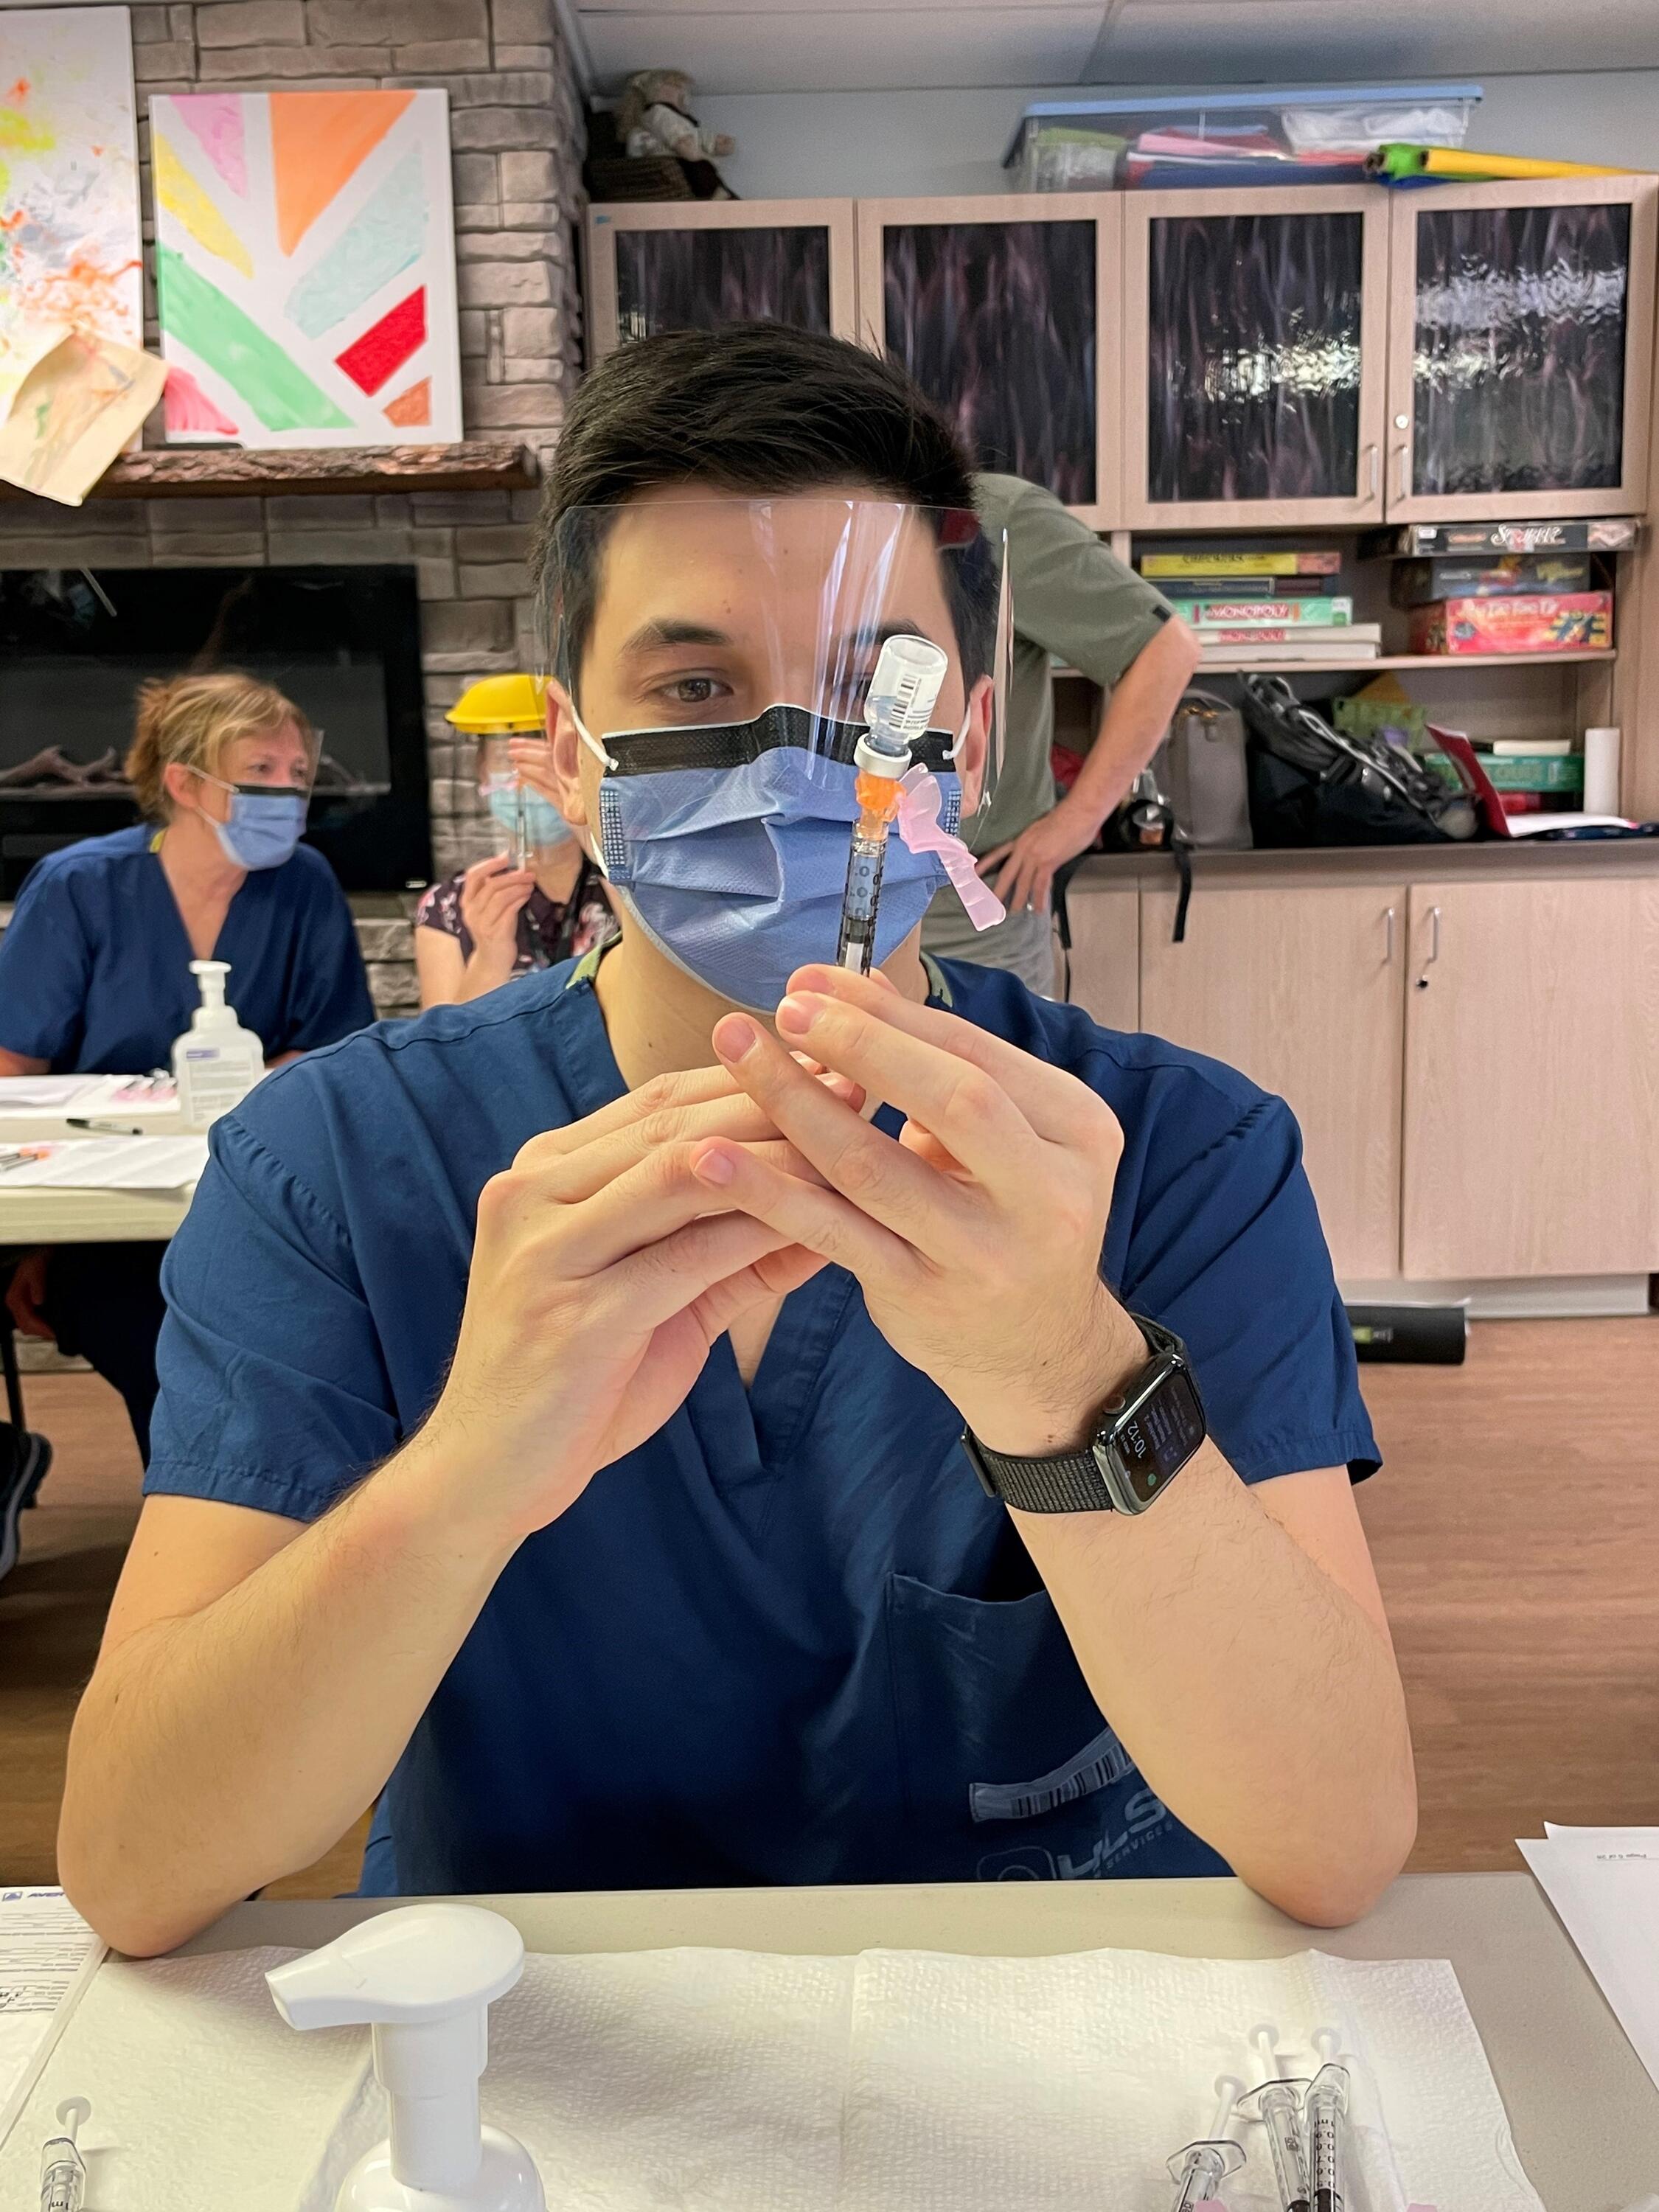 Alex Wong preparing a needle for injection